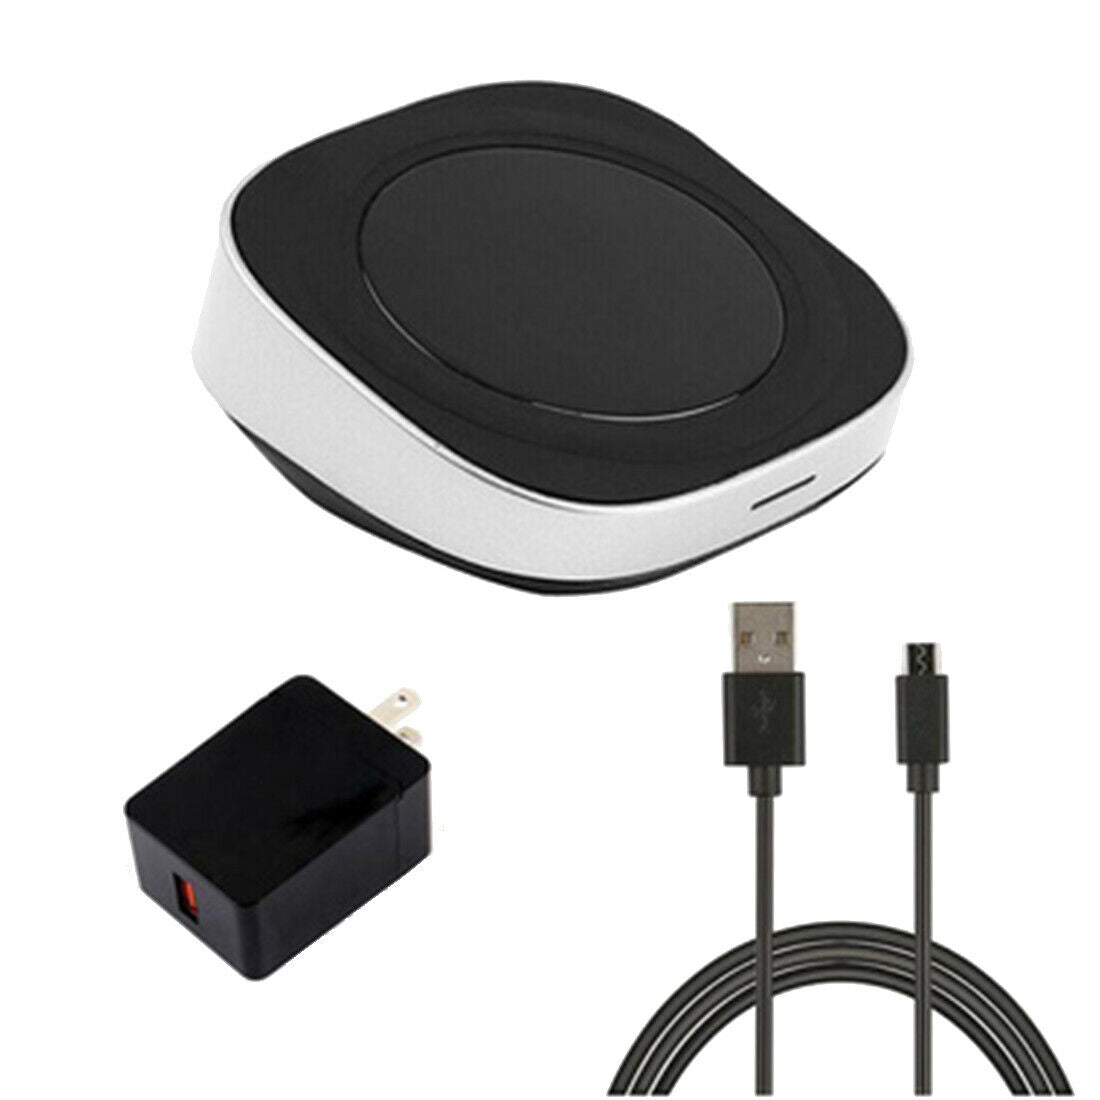 Cirago Fast Qi Wireless Charger Vent Charging Kit Pad for iPhone, Samsung Galaxy